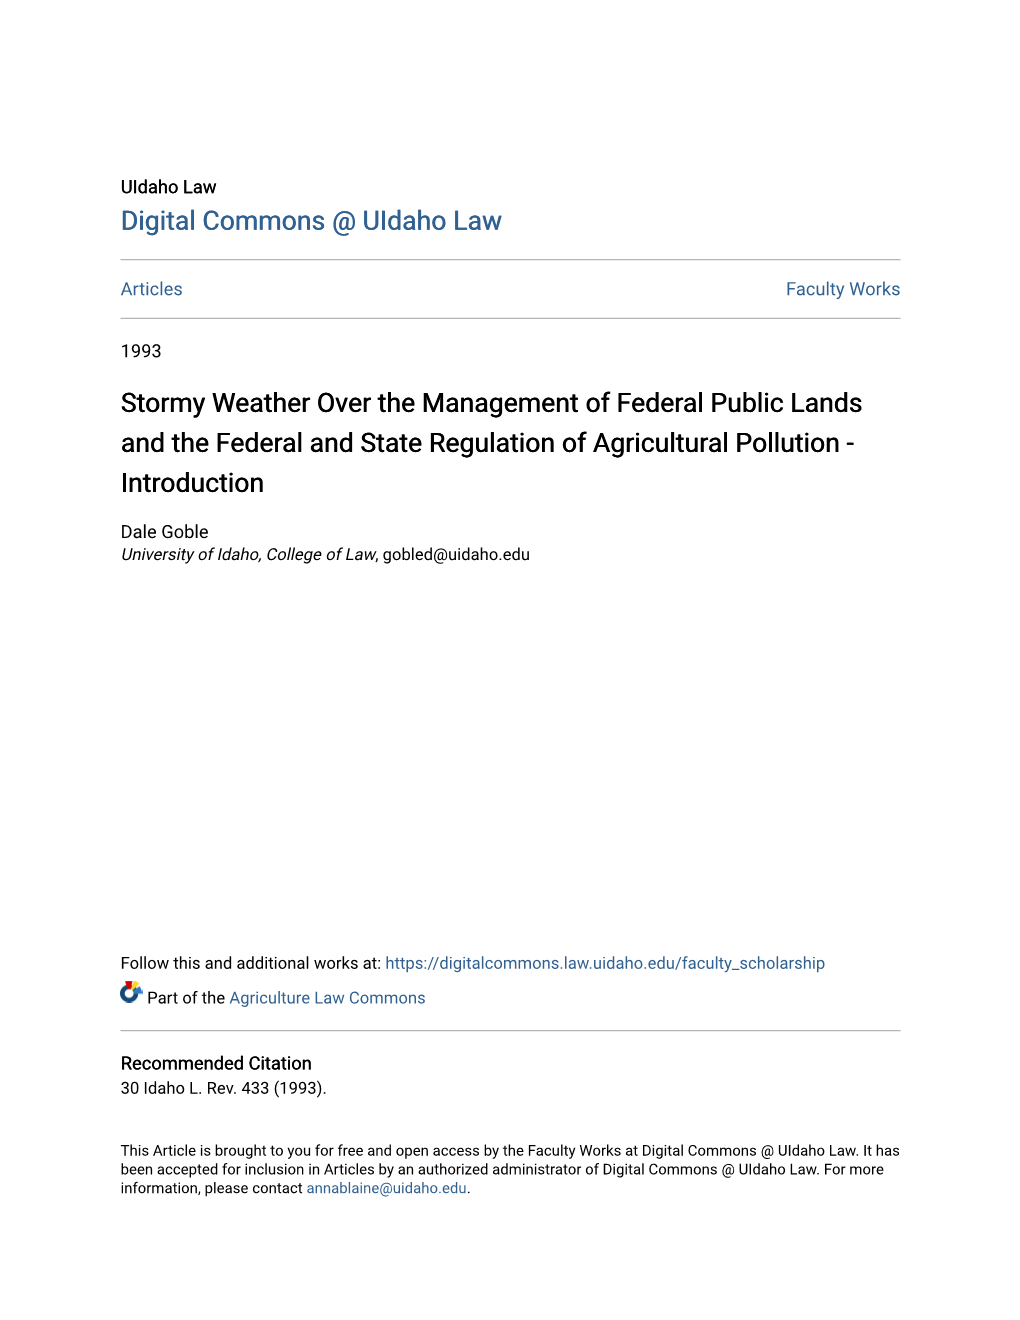 Stormy Weather Over the Management of Federal Public Lands and the Federal and State Regulation of Agricultural Pollution - Introduction